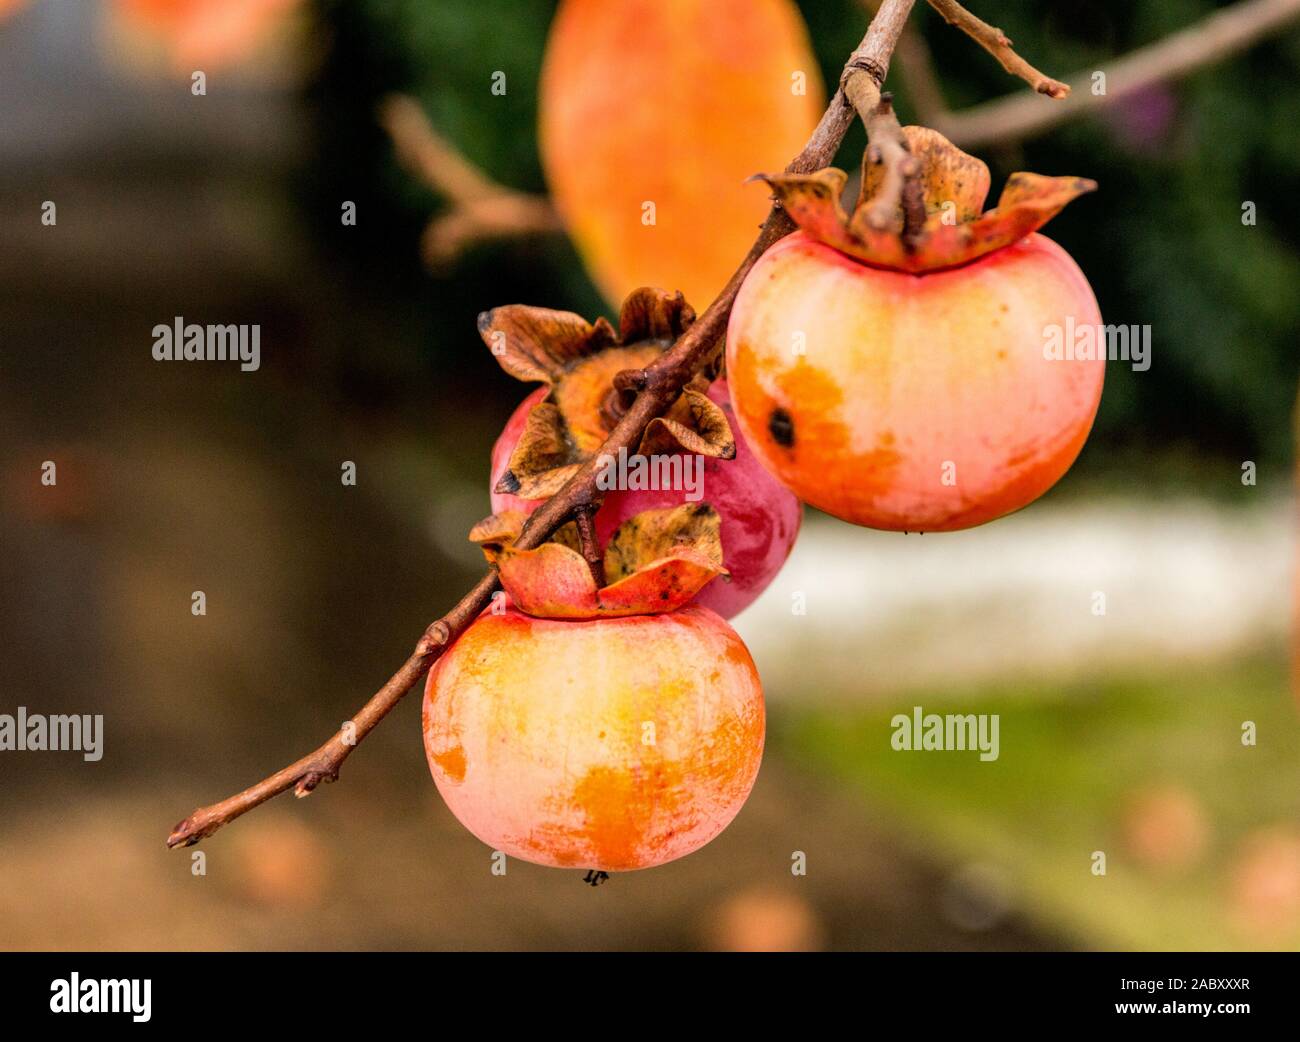 Persimmon, a typical autumn fruit. Particular Stock Photo